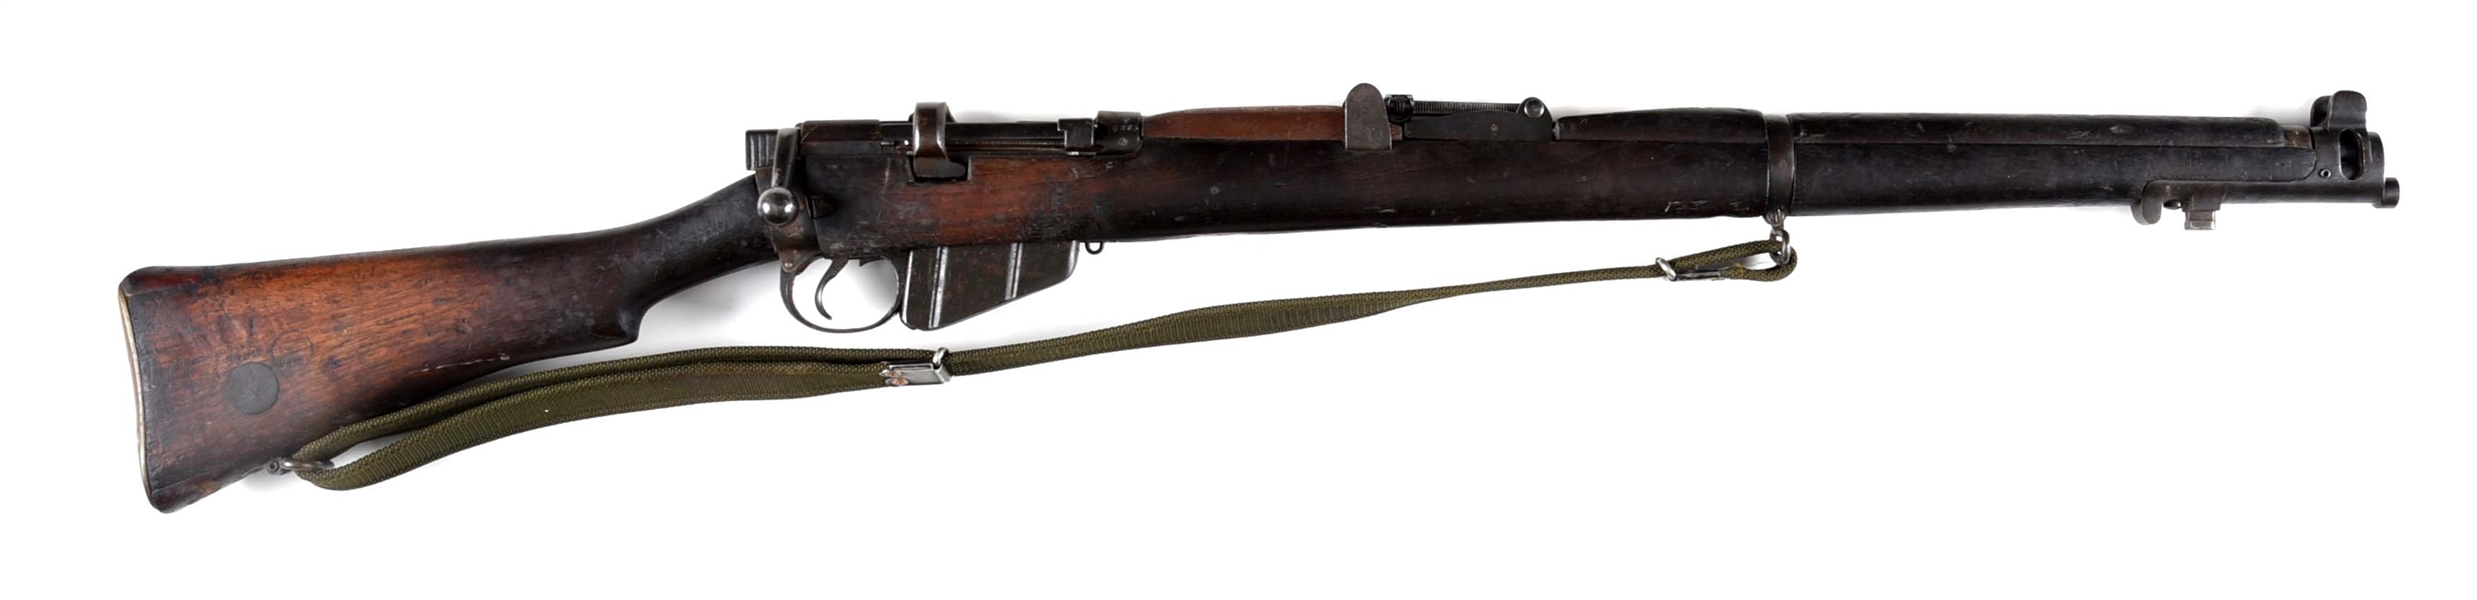 (C) NEW ZEALAND MARKED ENFIELD SMLE MK III* BOLT ACTION RIFLE.